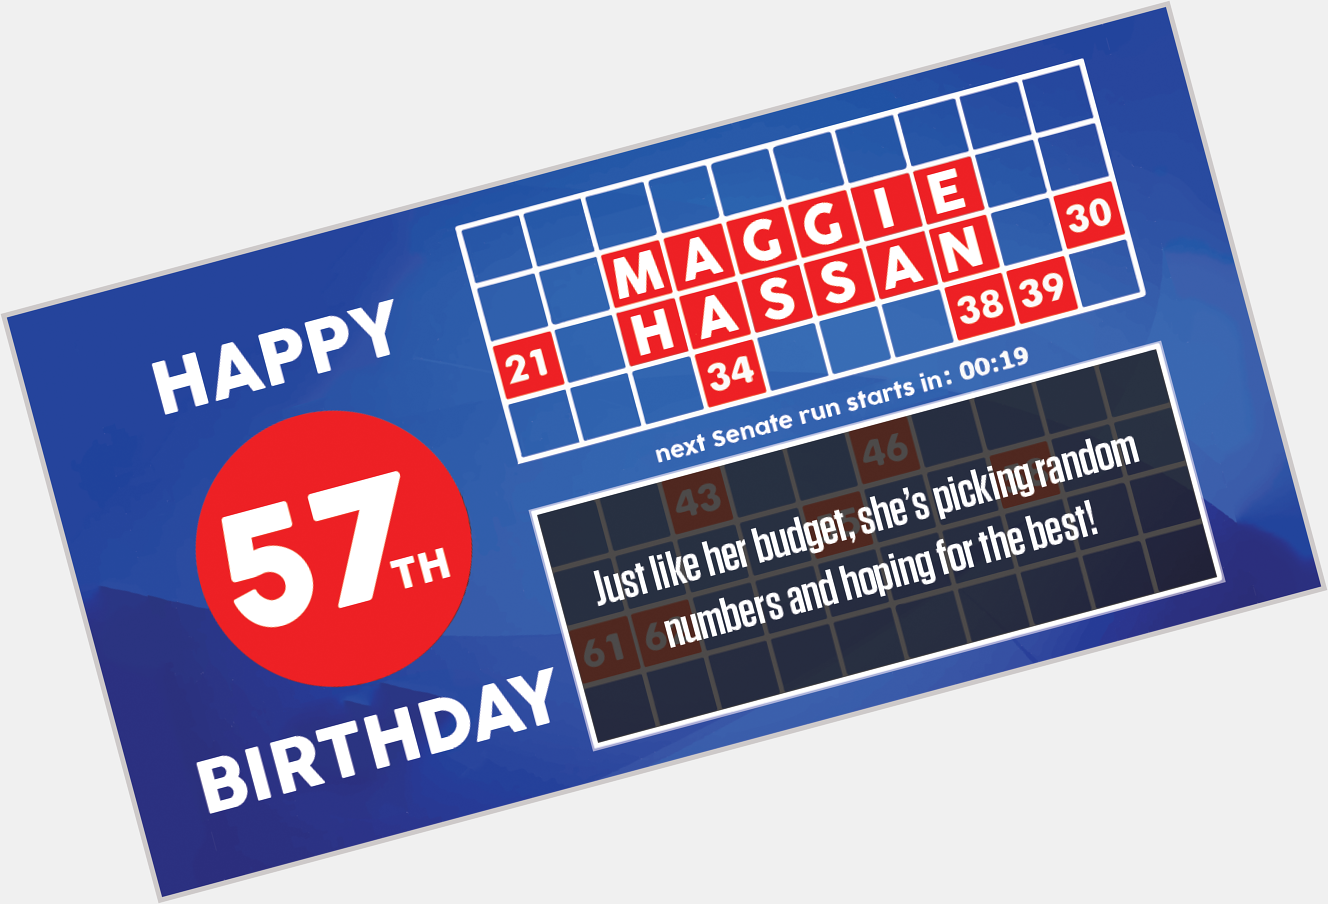 Happy Birthday to Gov. Maggie Hassan. Just like her budget, she\s picking random numbers and hoping for the best! 